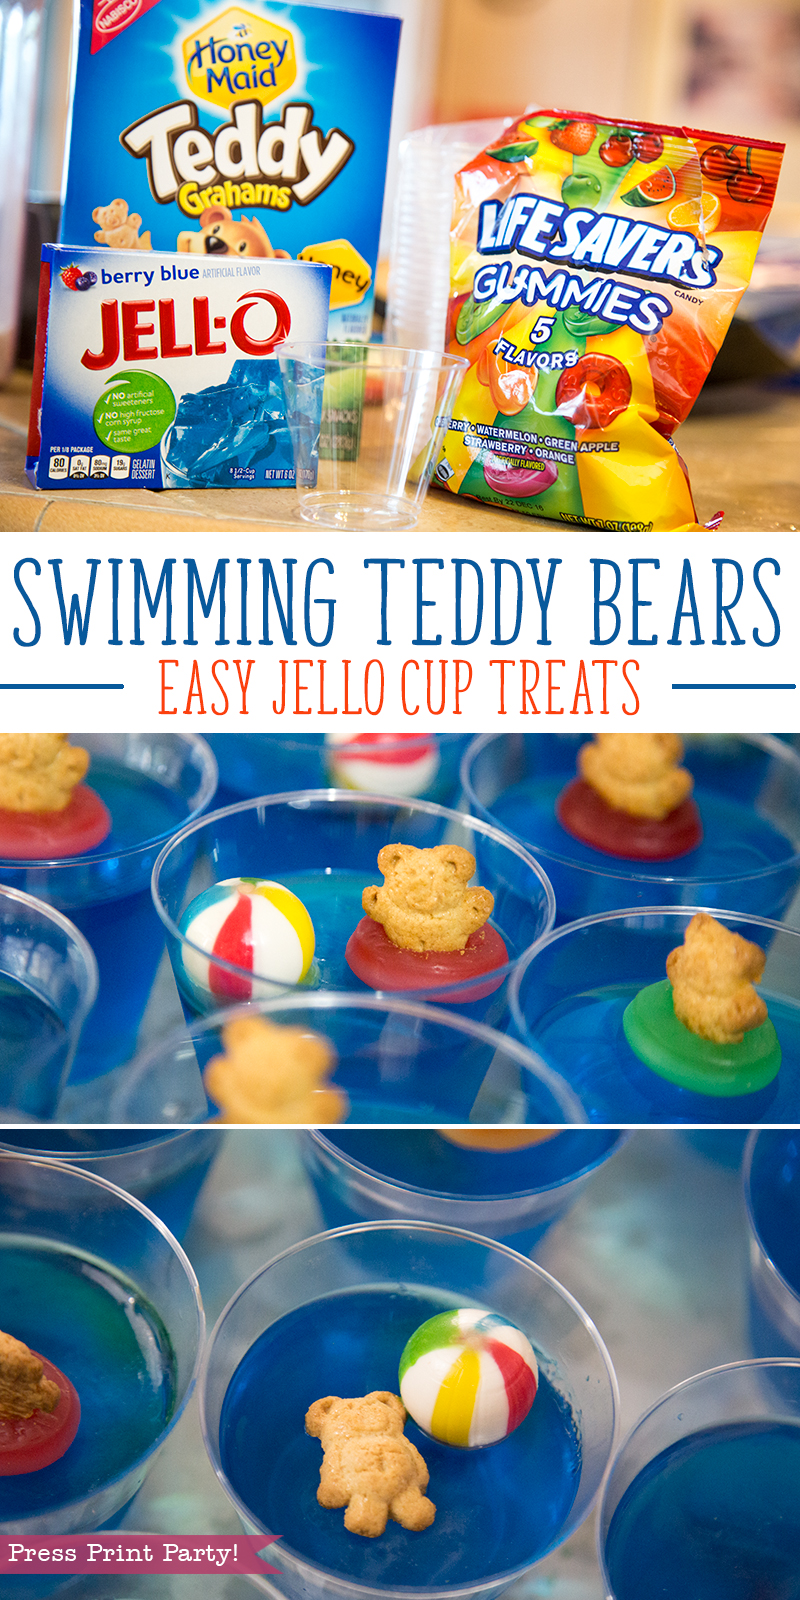 Teddy Bear Swimmers Easy Jello cup Treats. By Press Print Party!